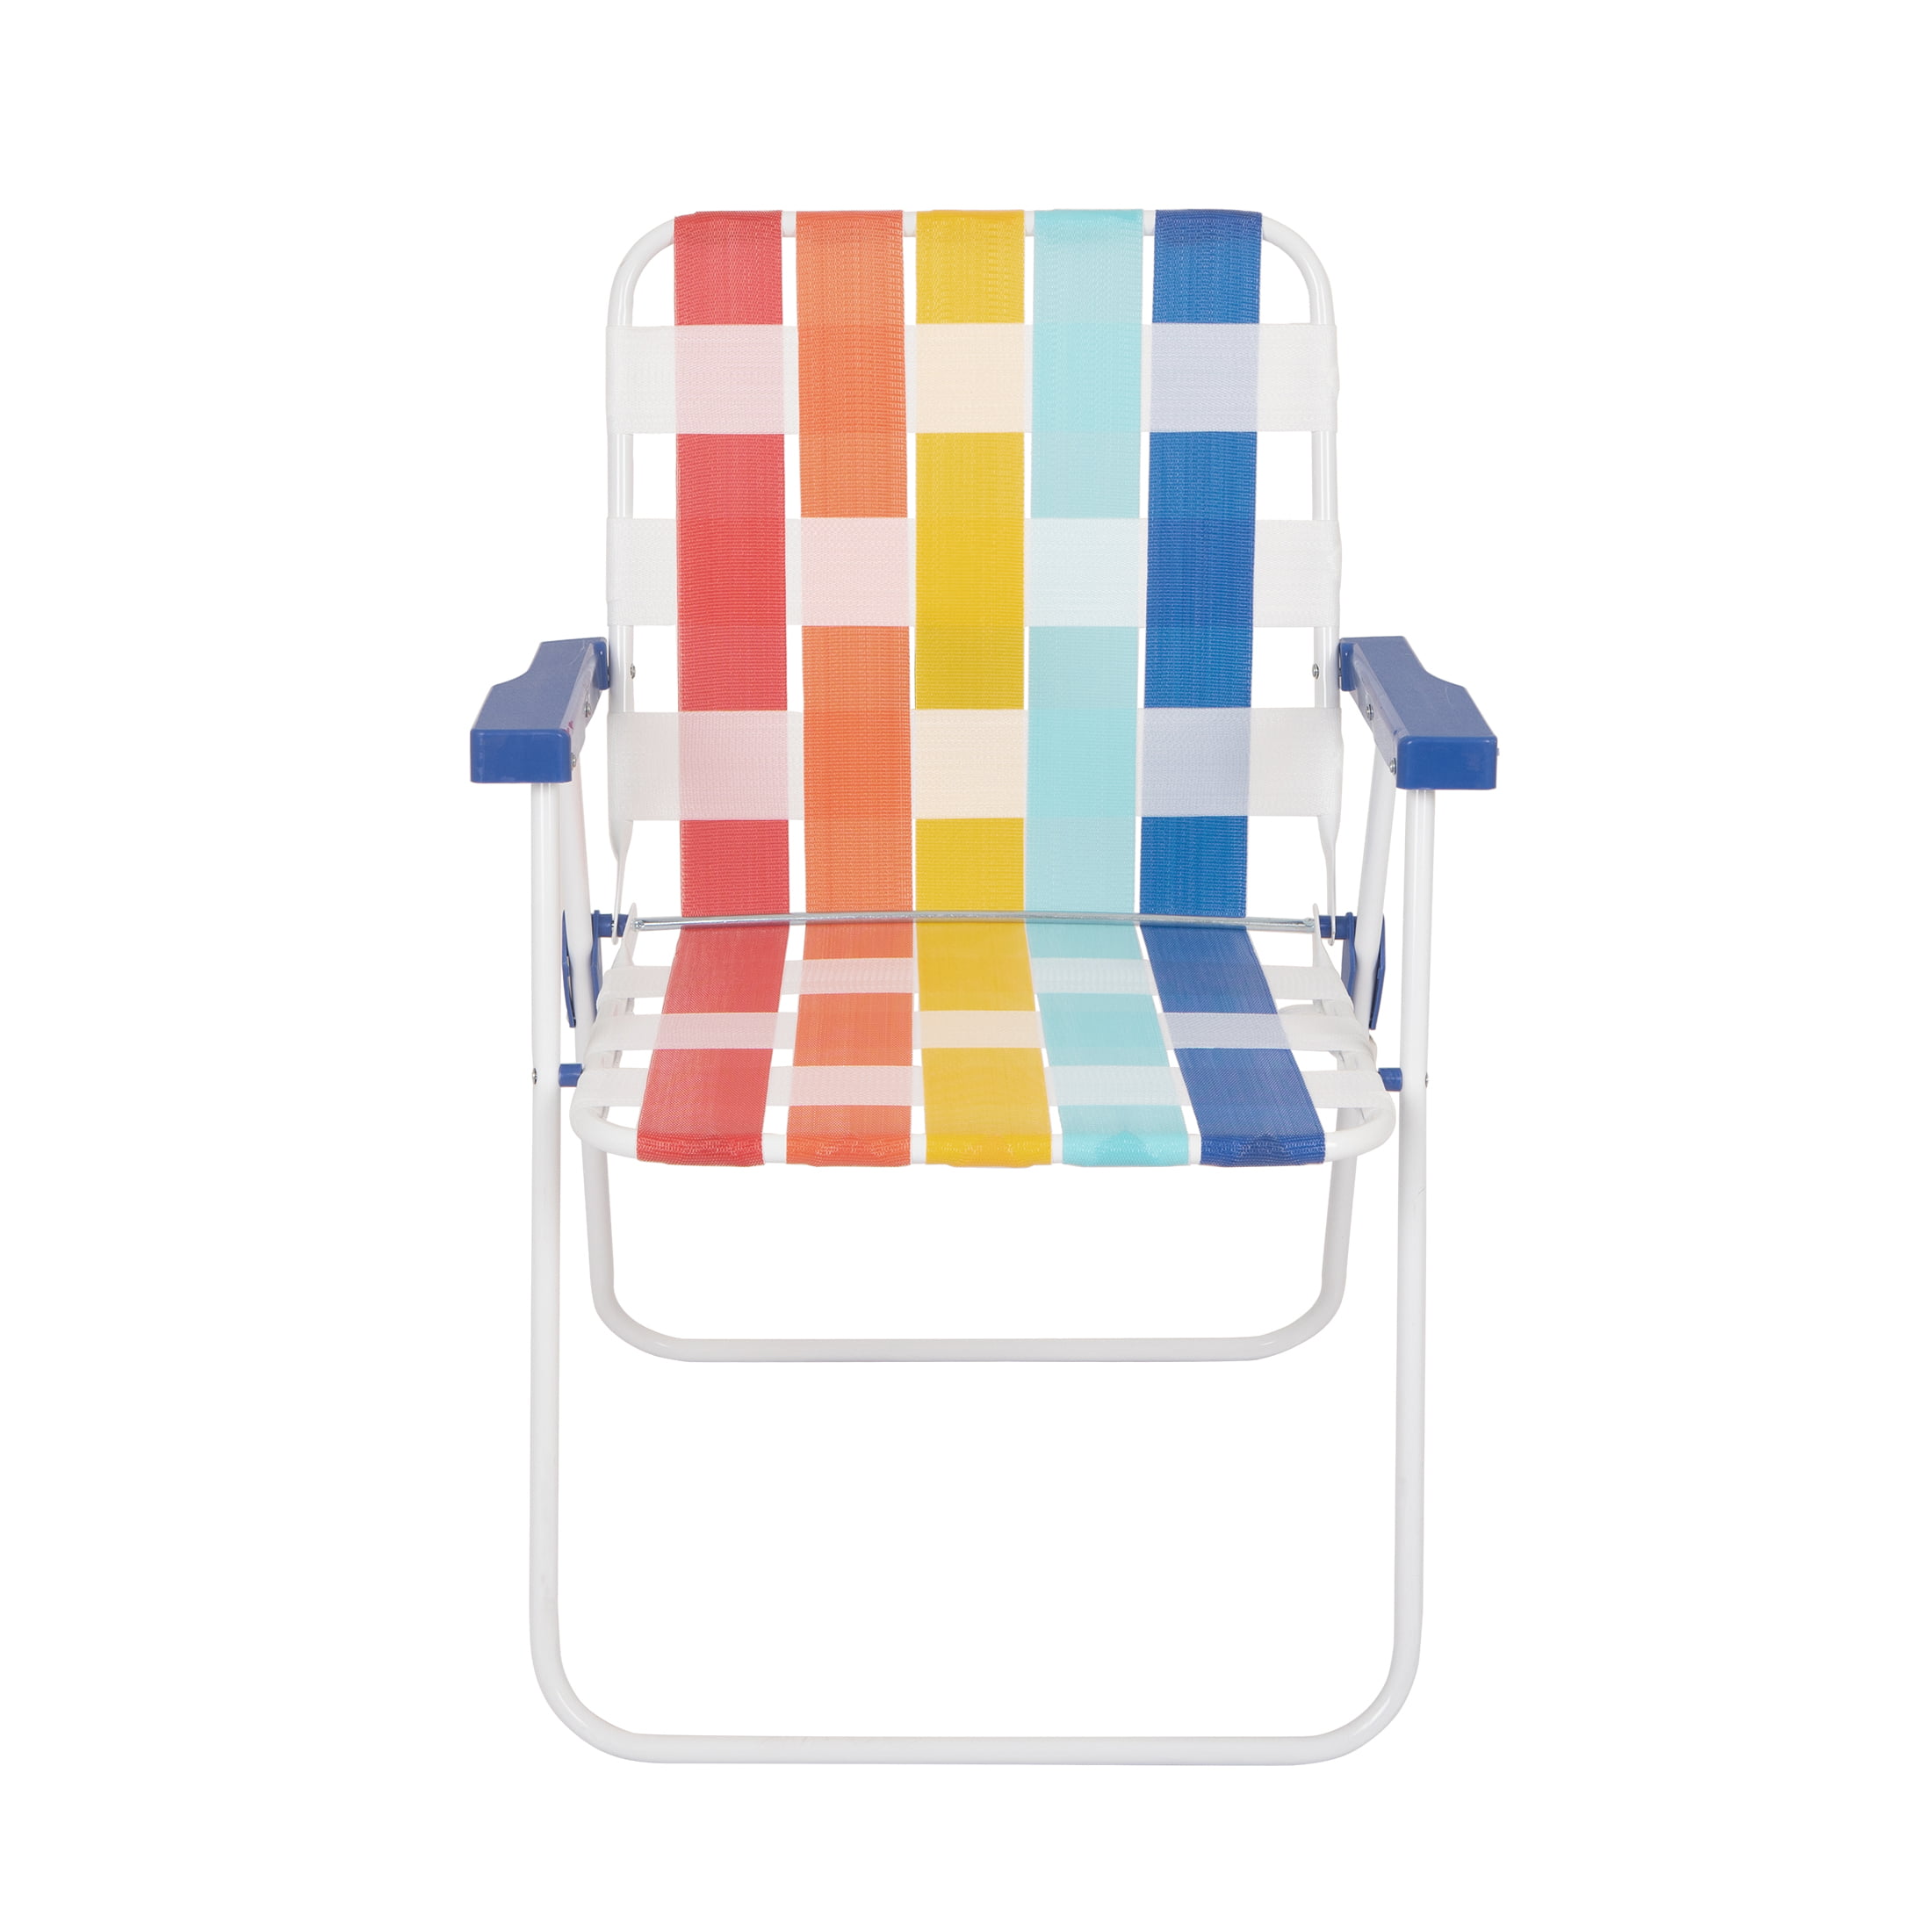 Mainstays Folding Beach Web Chair, Multicolor - image 3 of 9